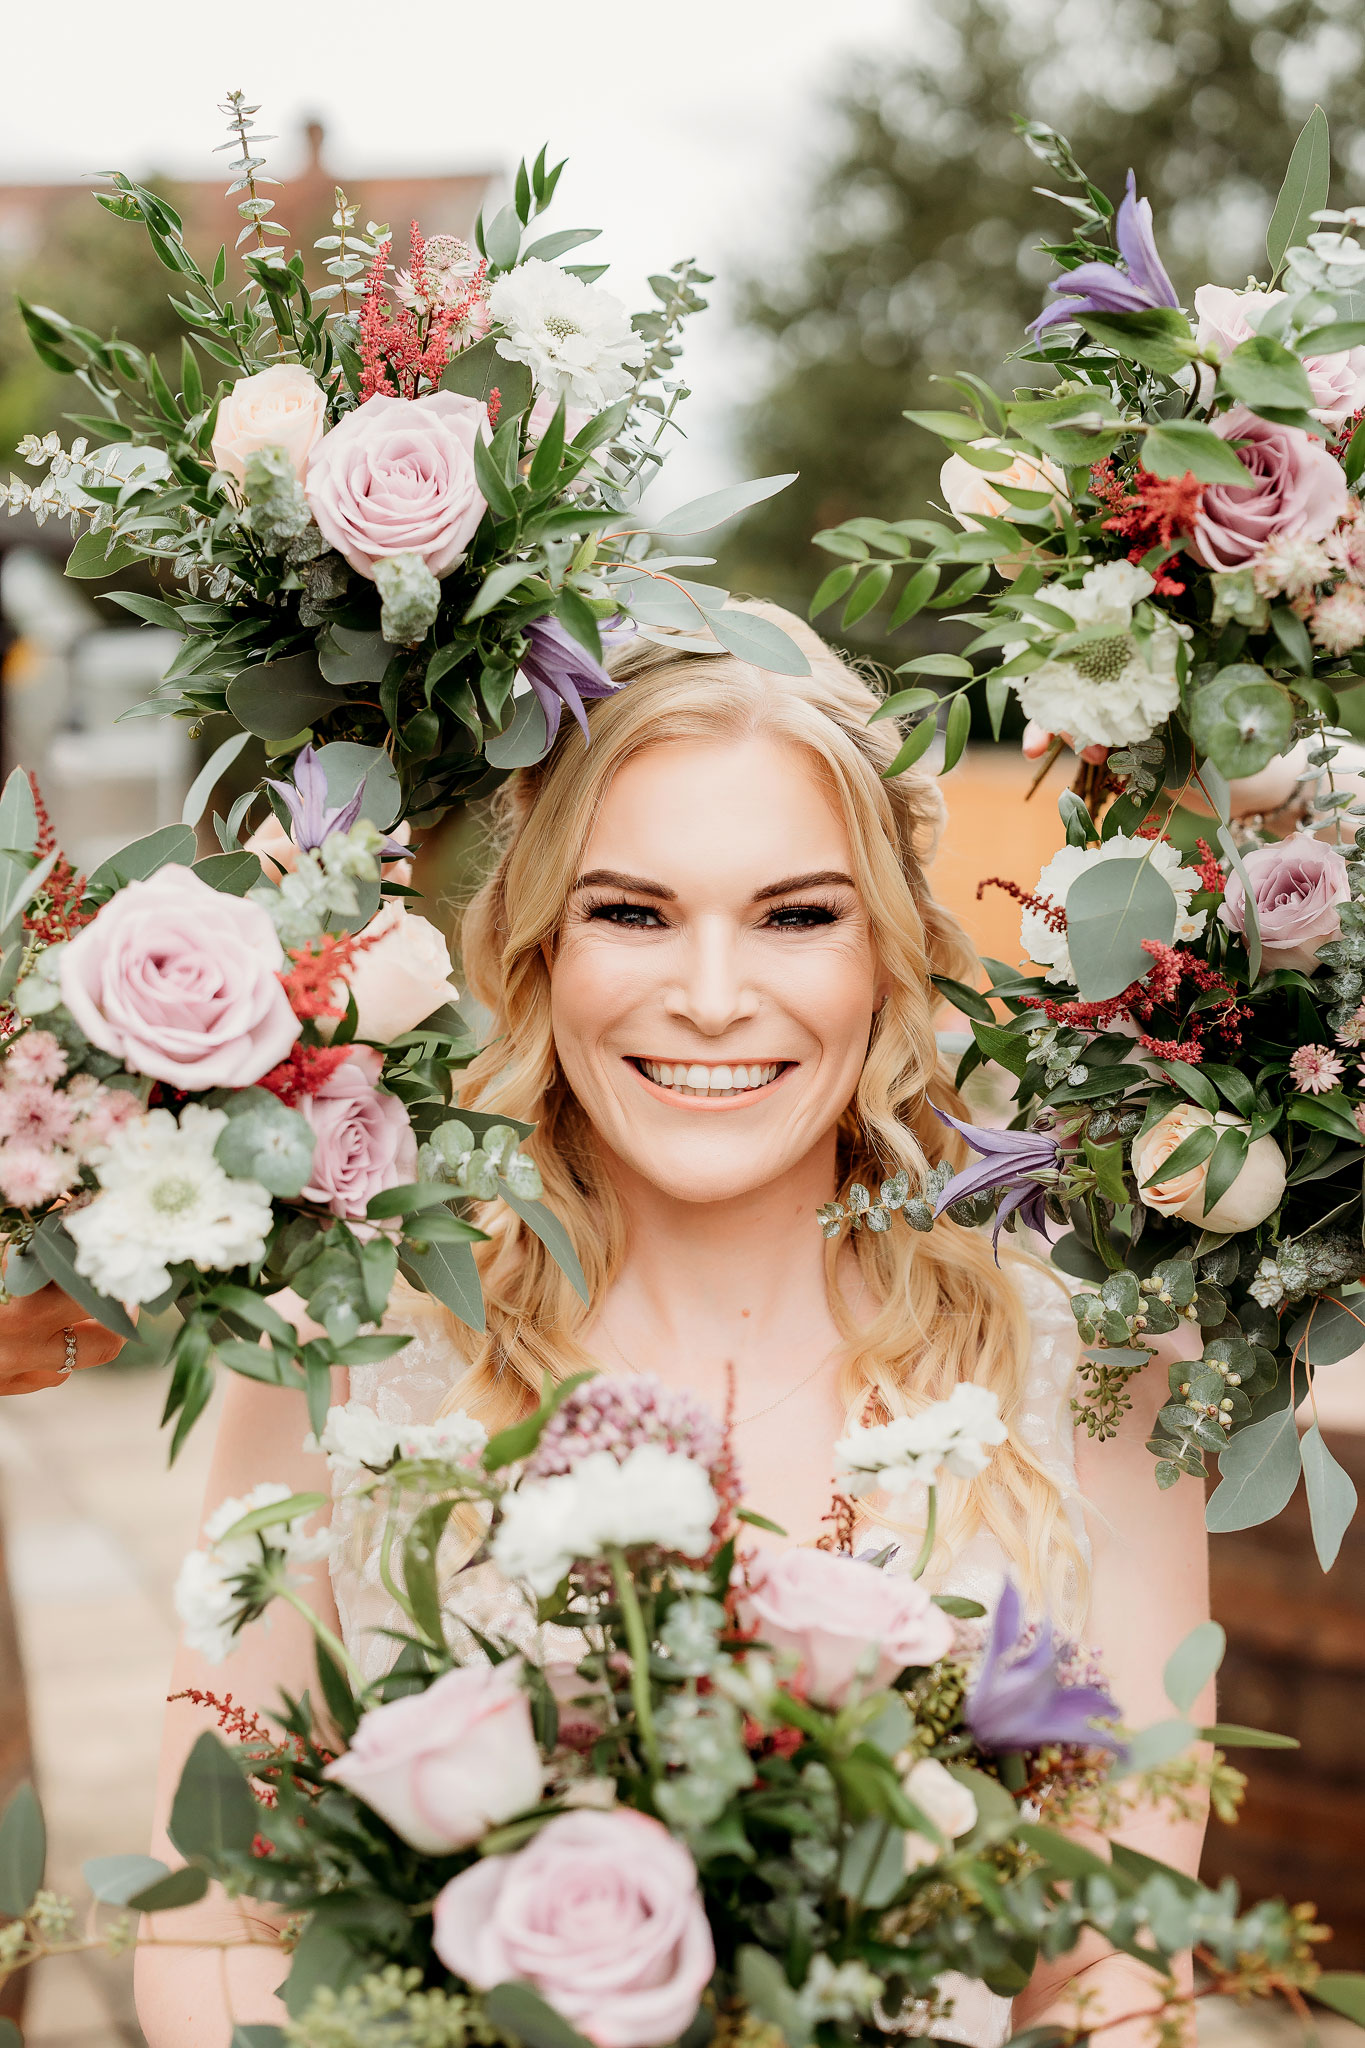 a lovely smile from the bride surrounded by flowers